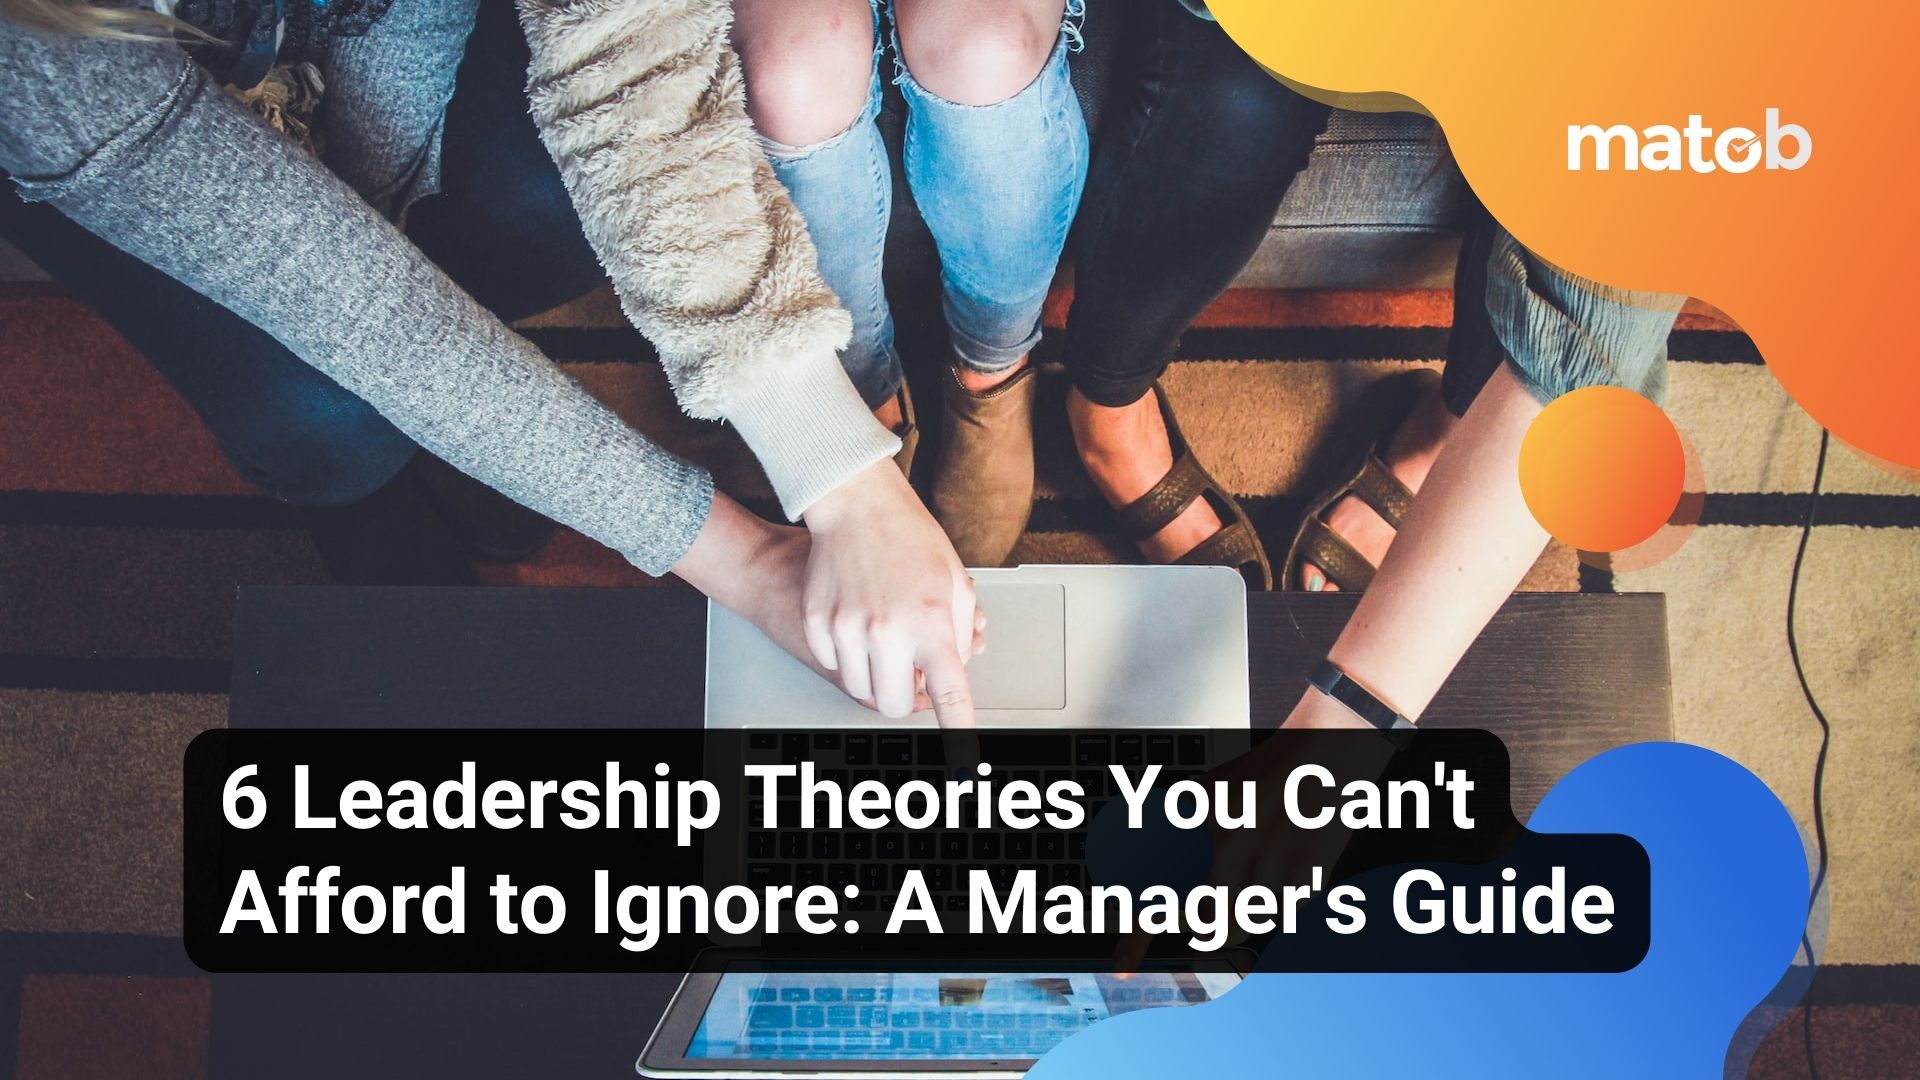 6 Leadership Theories You Can't Afford to Ignore: A Manager's Guide